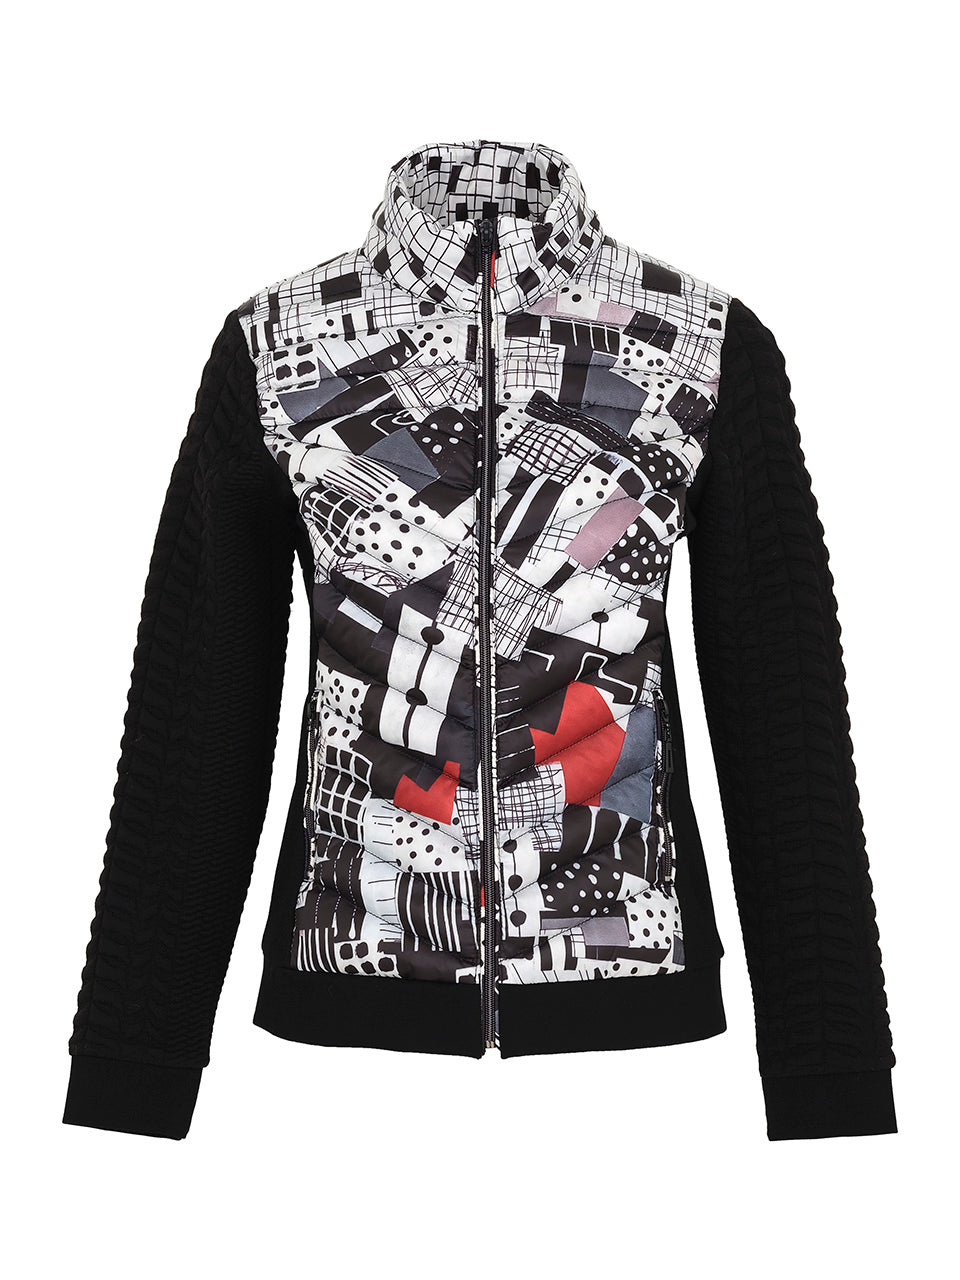 Dolcezza “Tear Down The Wall” Black, White, Grey & Red Print Zip Jacket